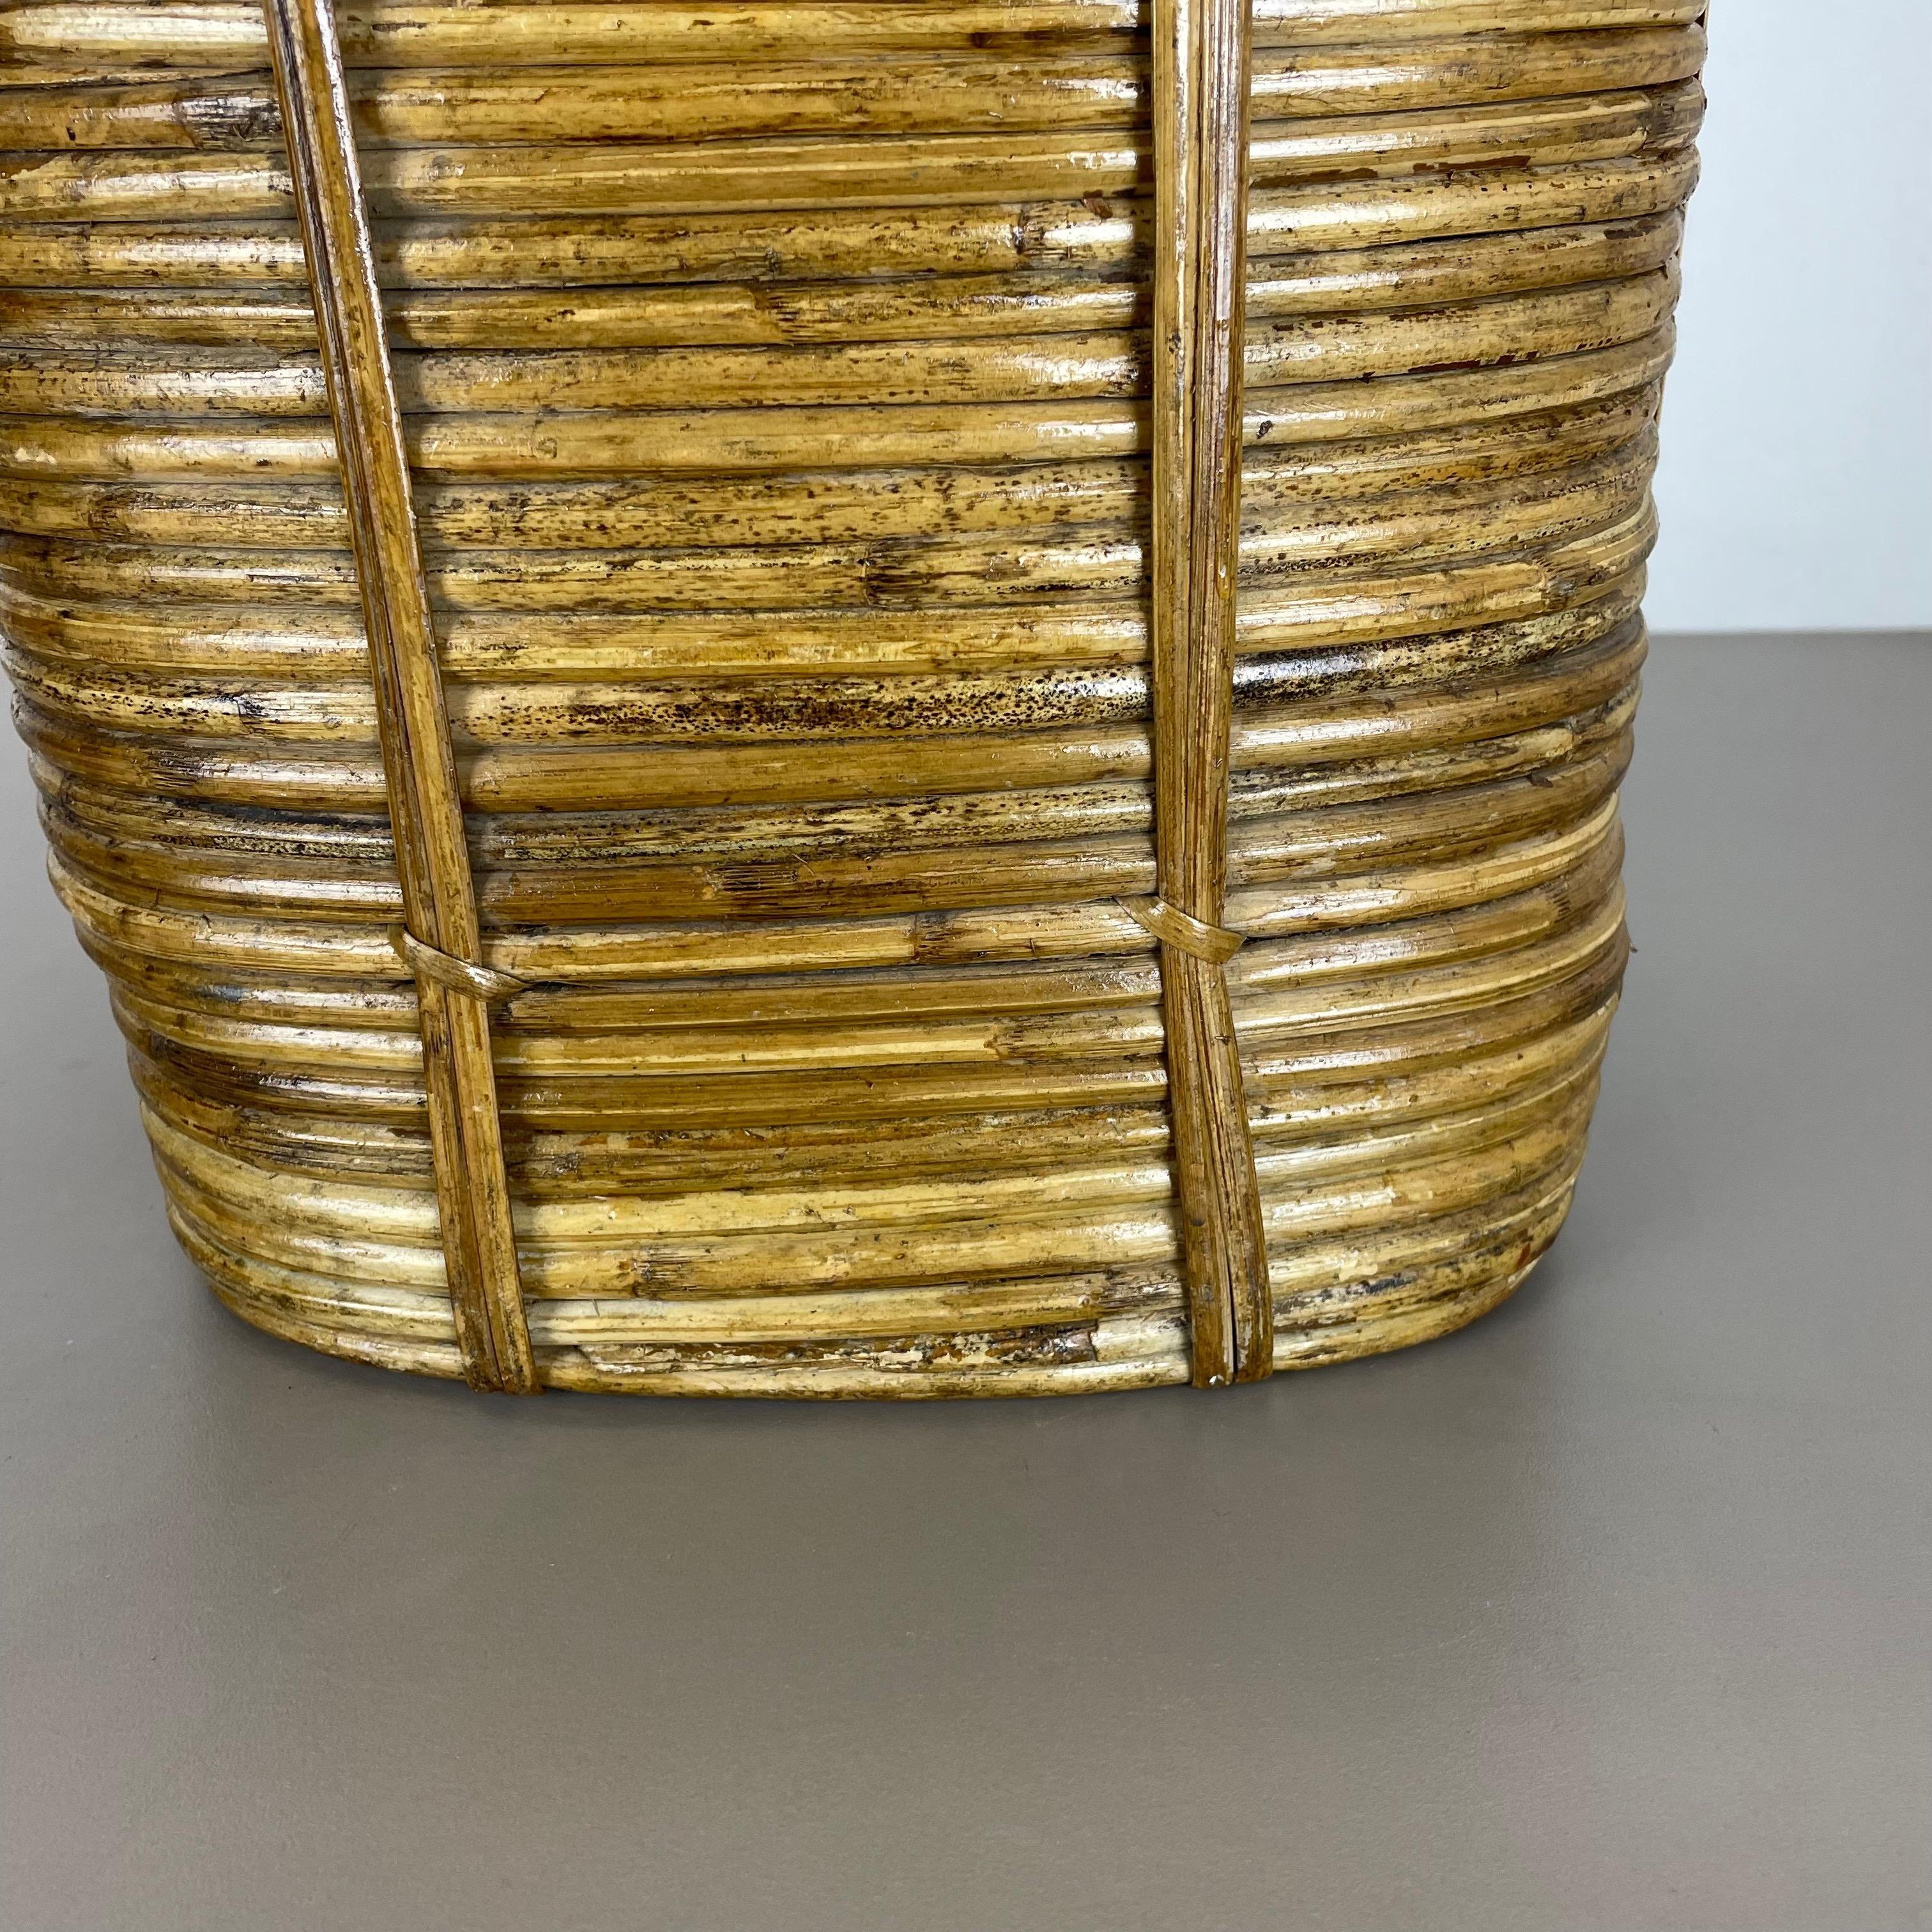 Aubock Style Rattan and Brass Bauhaus Waste Bin, Umbrella Stand, France, 1960s For Sale 8